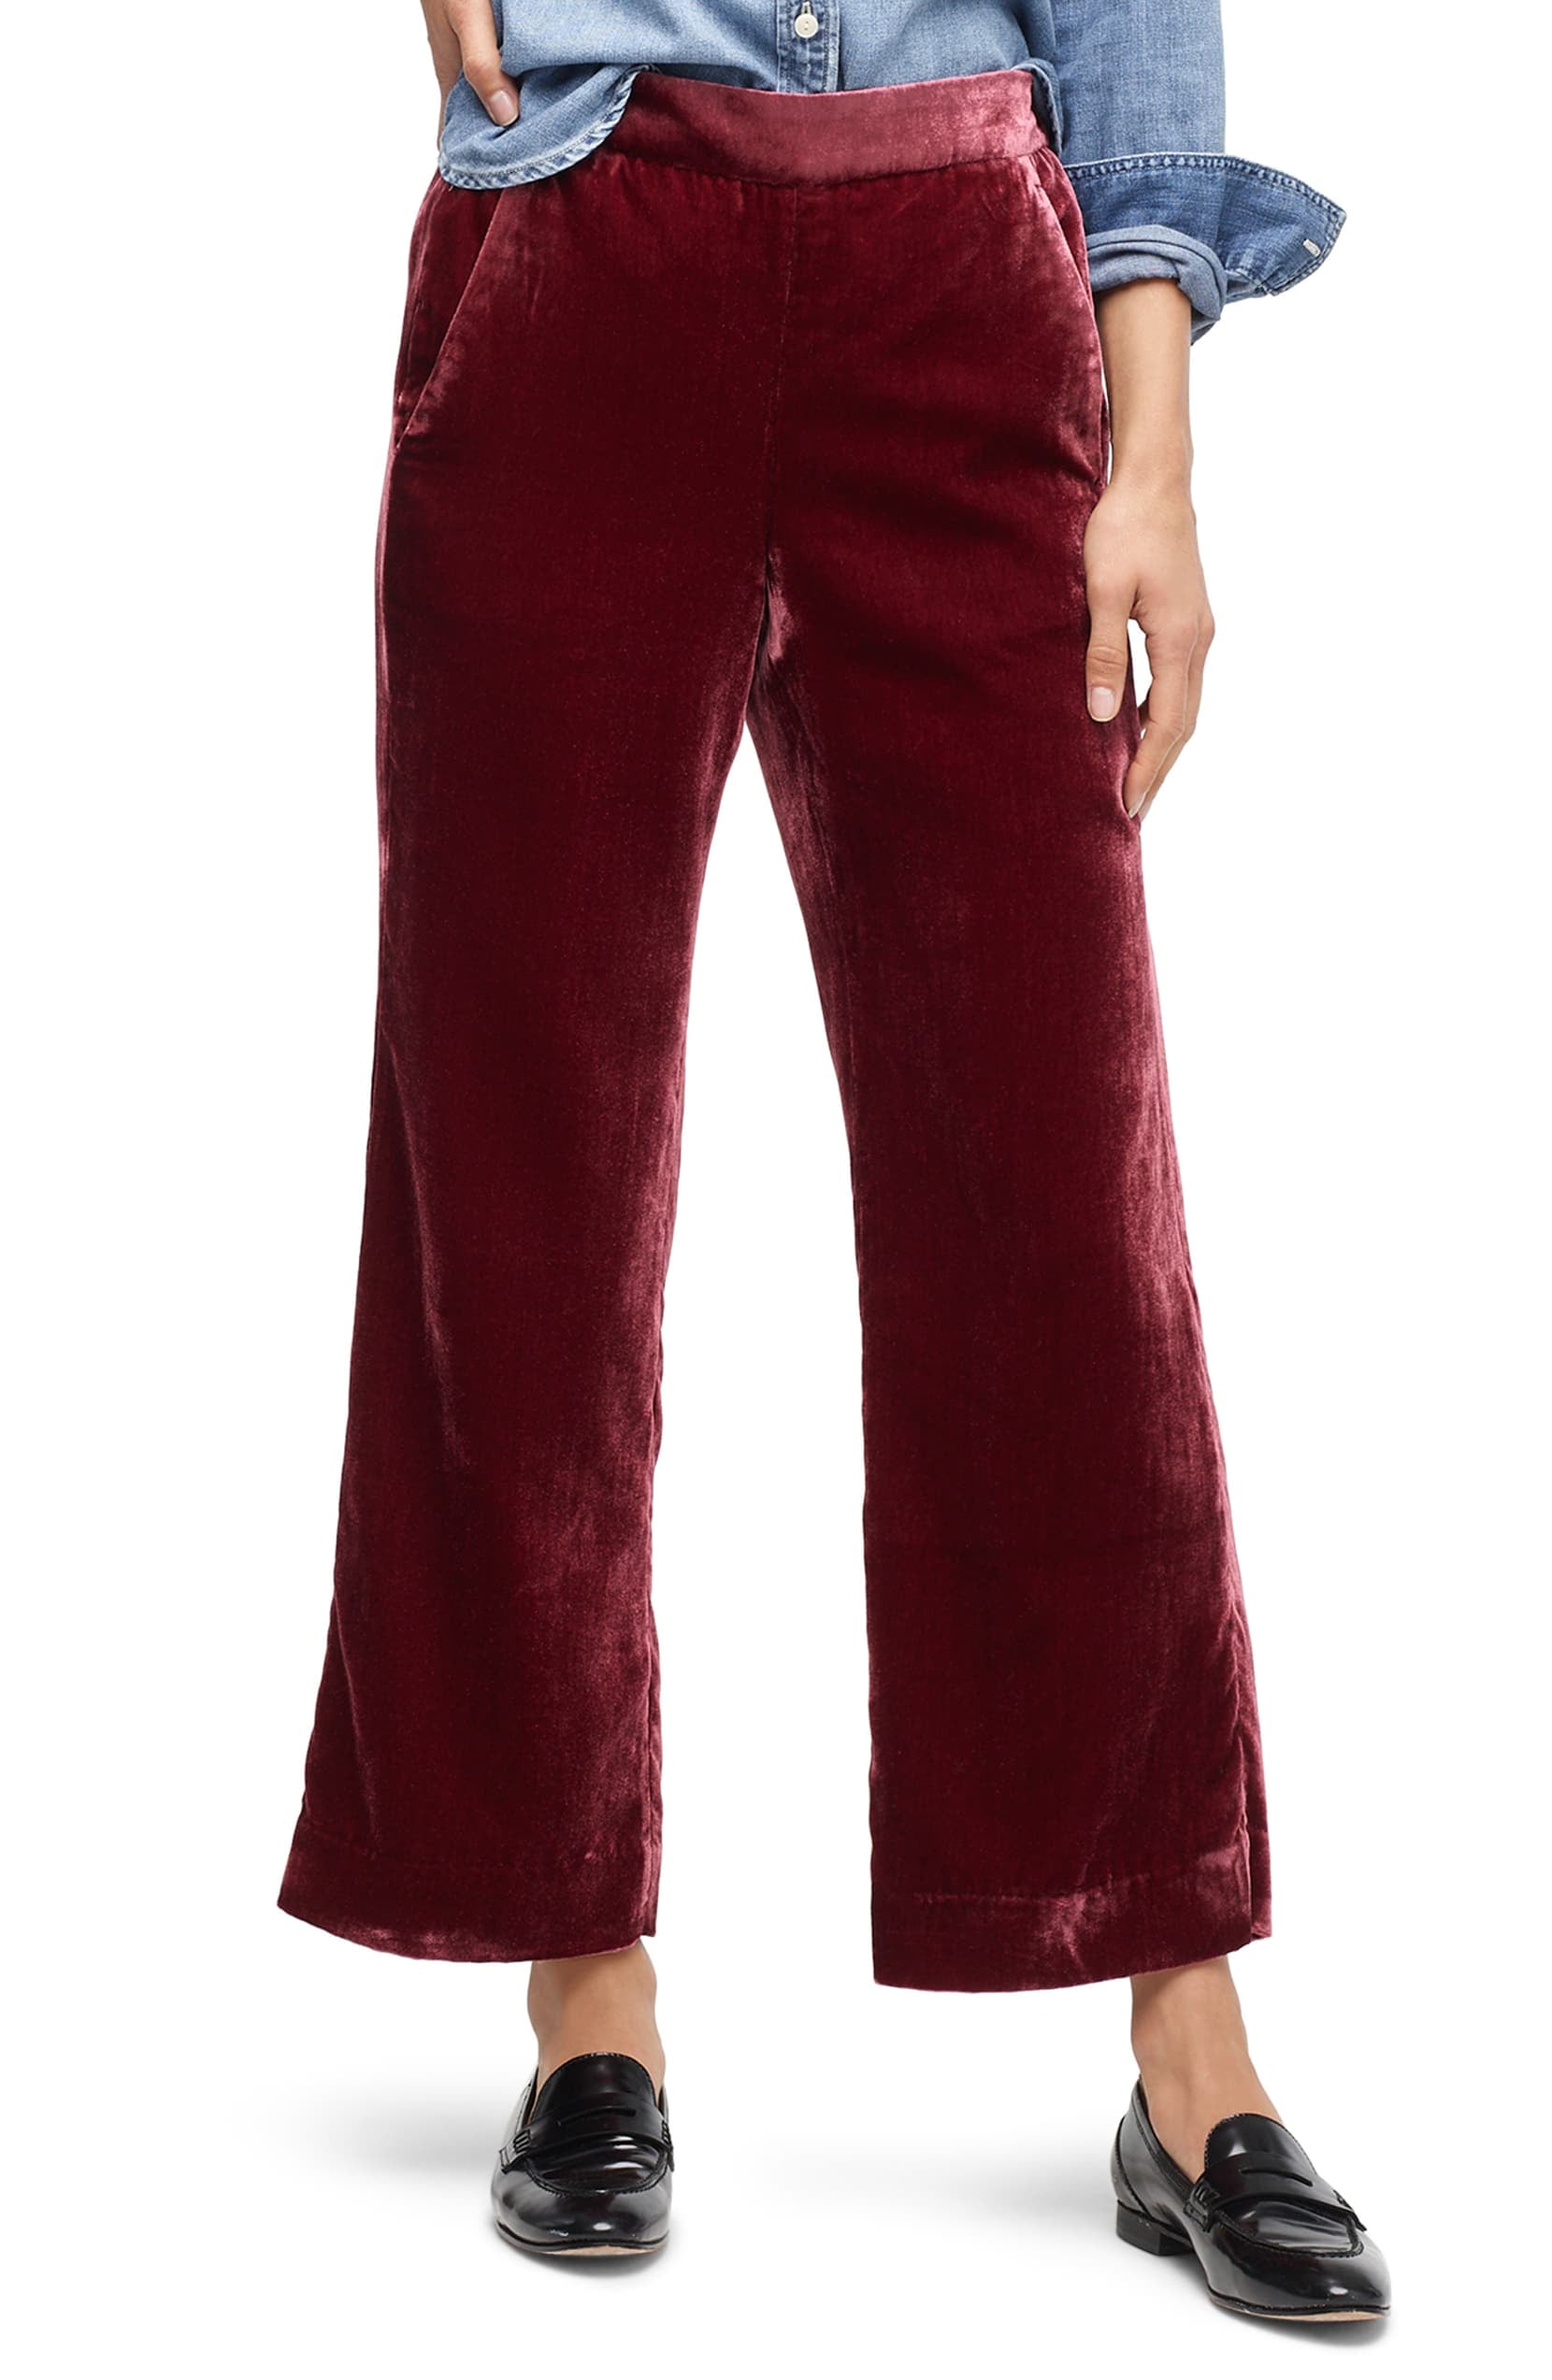 J.Crew Peyton Velvet Pull-On Pants, Nordstrom Dropped 17 New Pieces  That'll Have You Excited For October Outfits